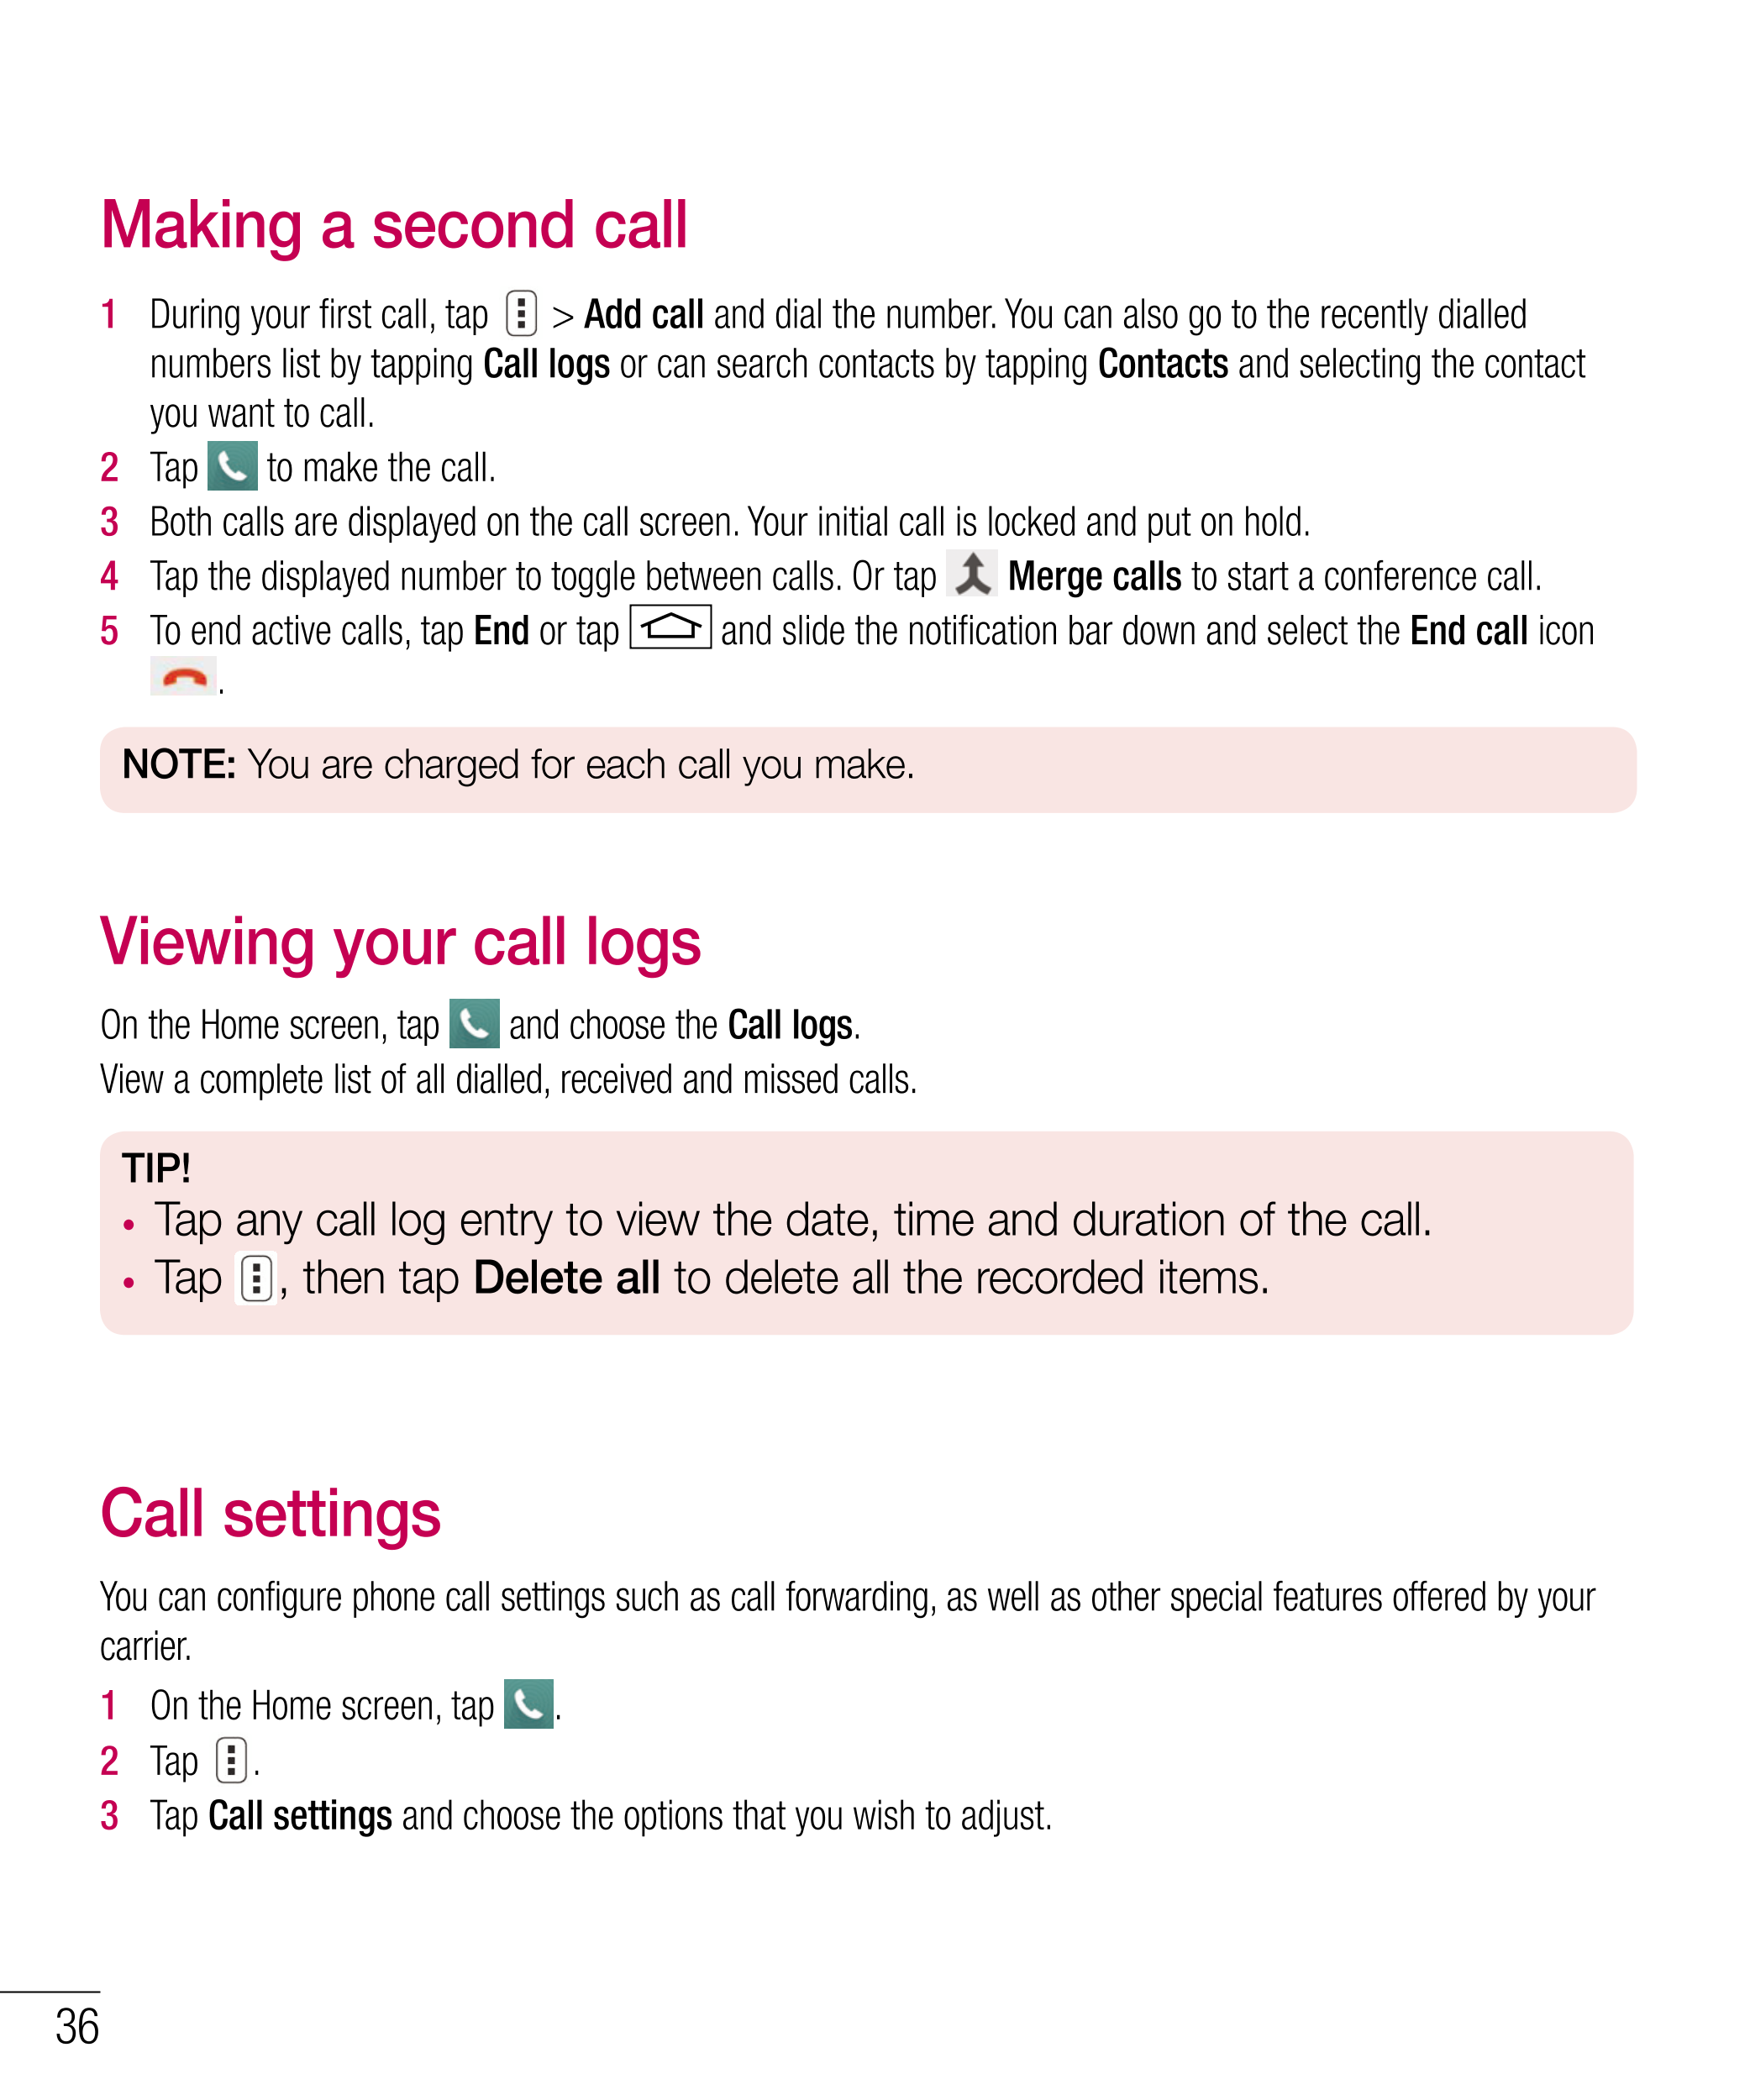 Making a second call
1   During your ﬁ rst call, tap    >  Add call and dial the number. You can also go to the recently dialled